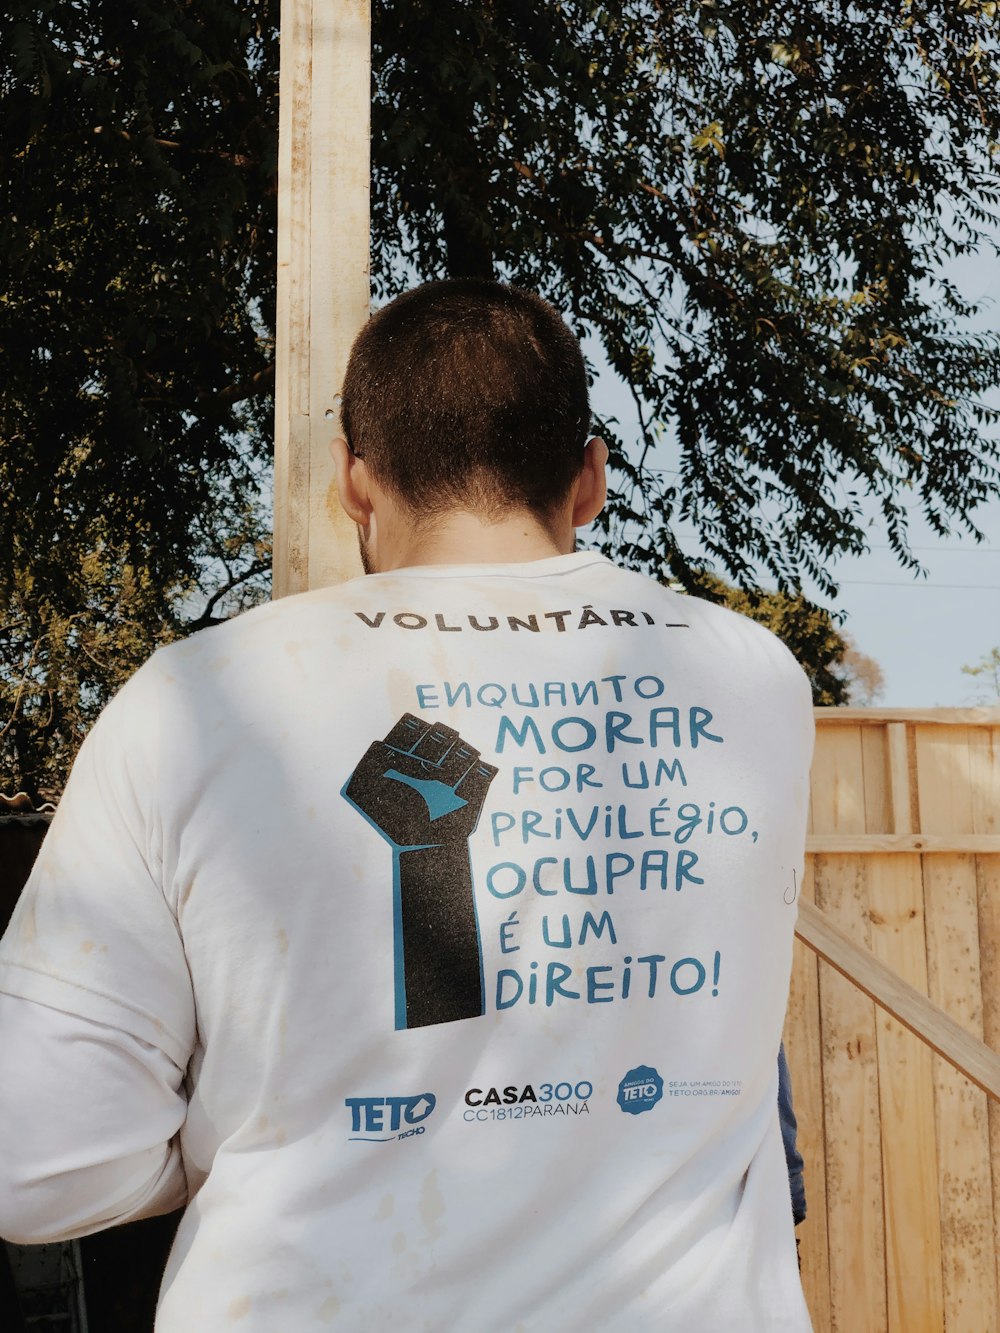 man in white and black crew neck t-shirt standing near brown wooden fence during daytime